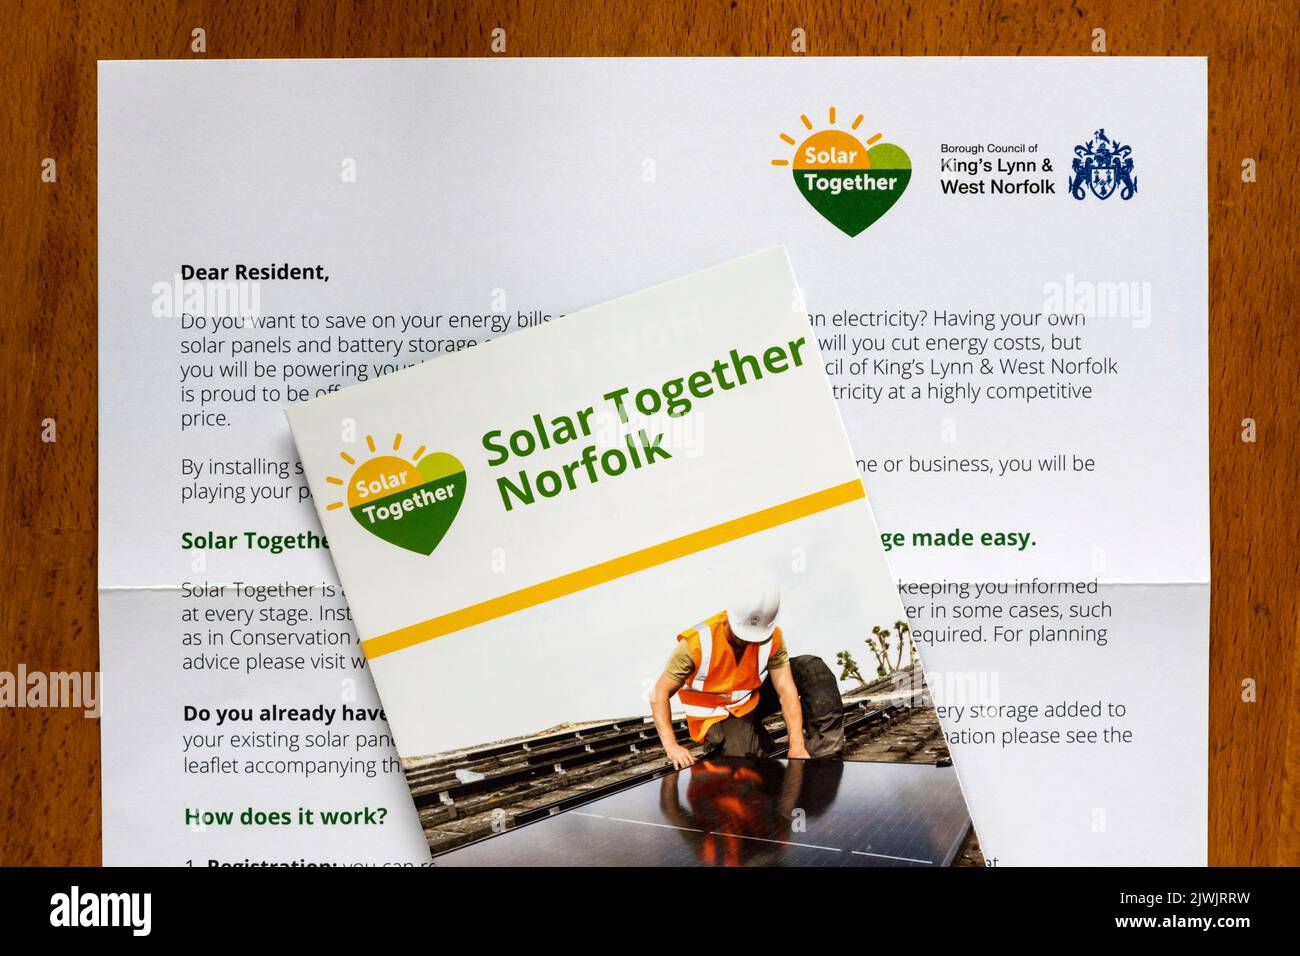 A letter & brochure to residents promoting Solar Together Norfolk, an initiative to install pv cells on houses. Stock Photo